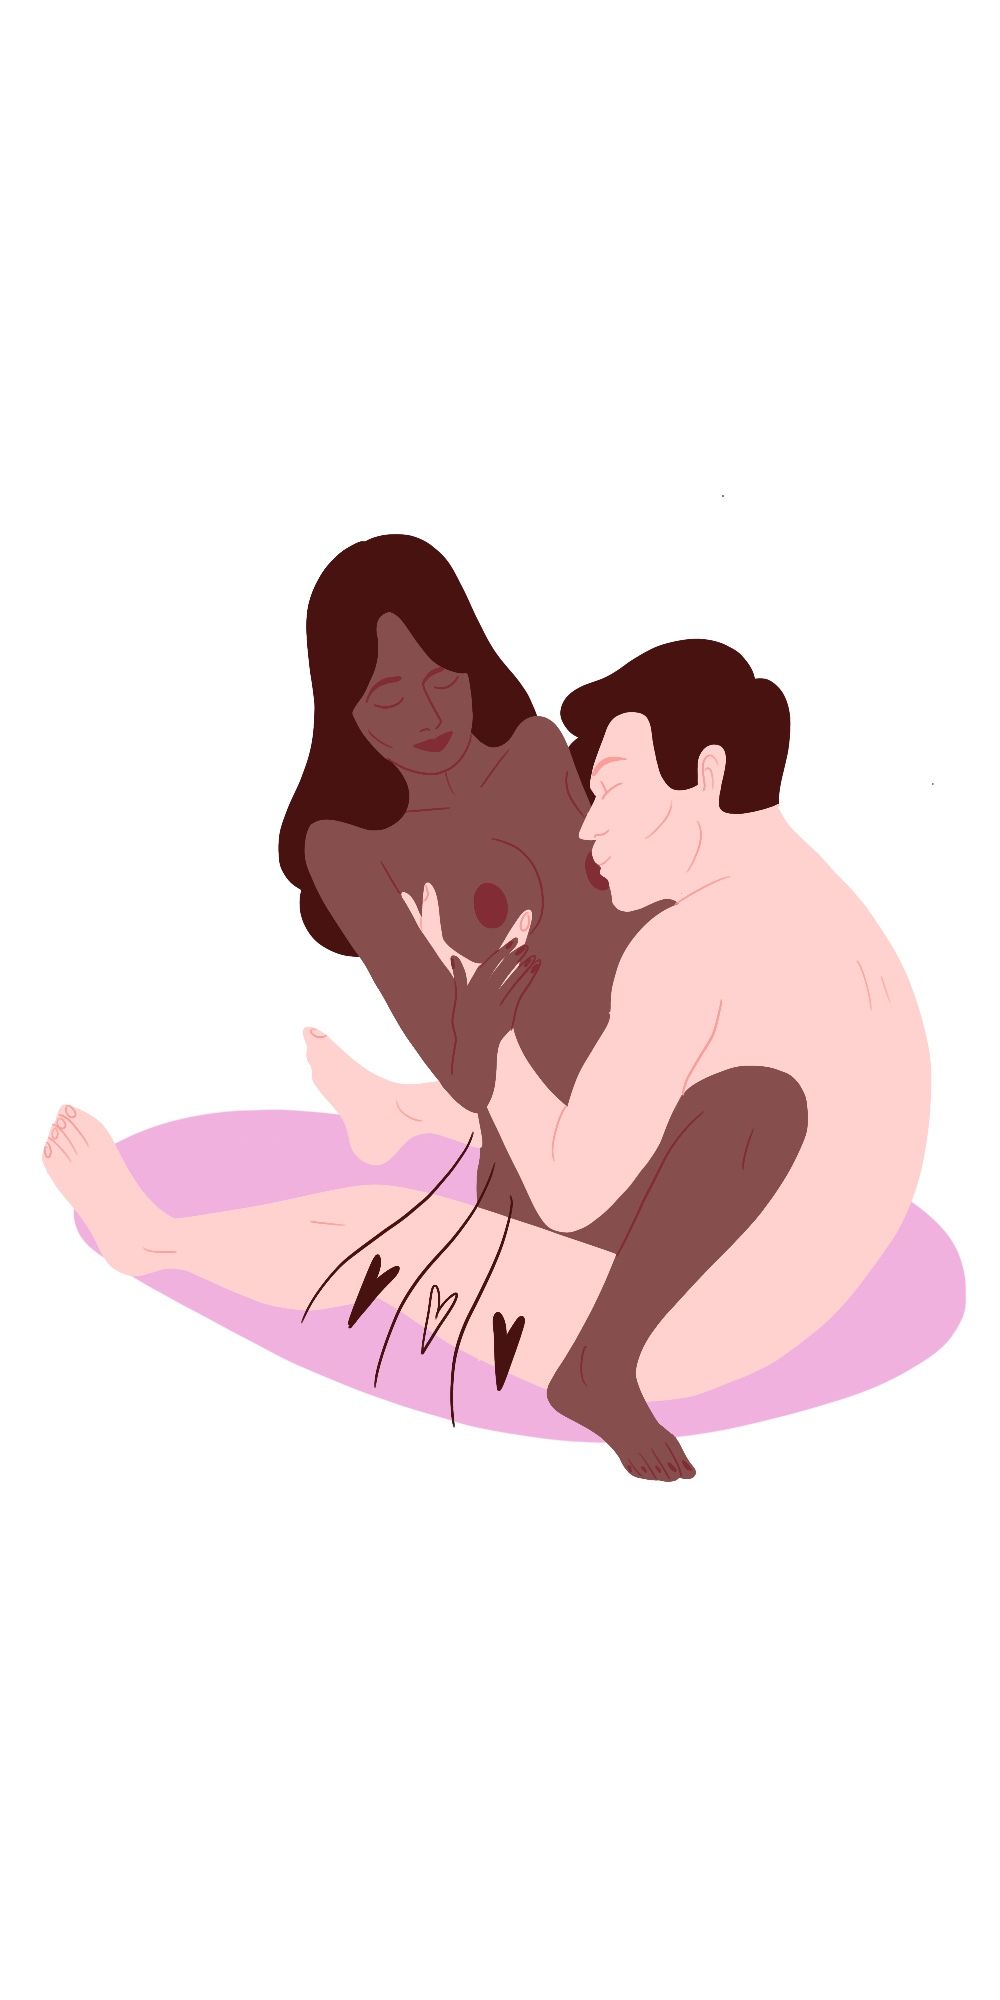 14 First Time Sex Positions image image